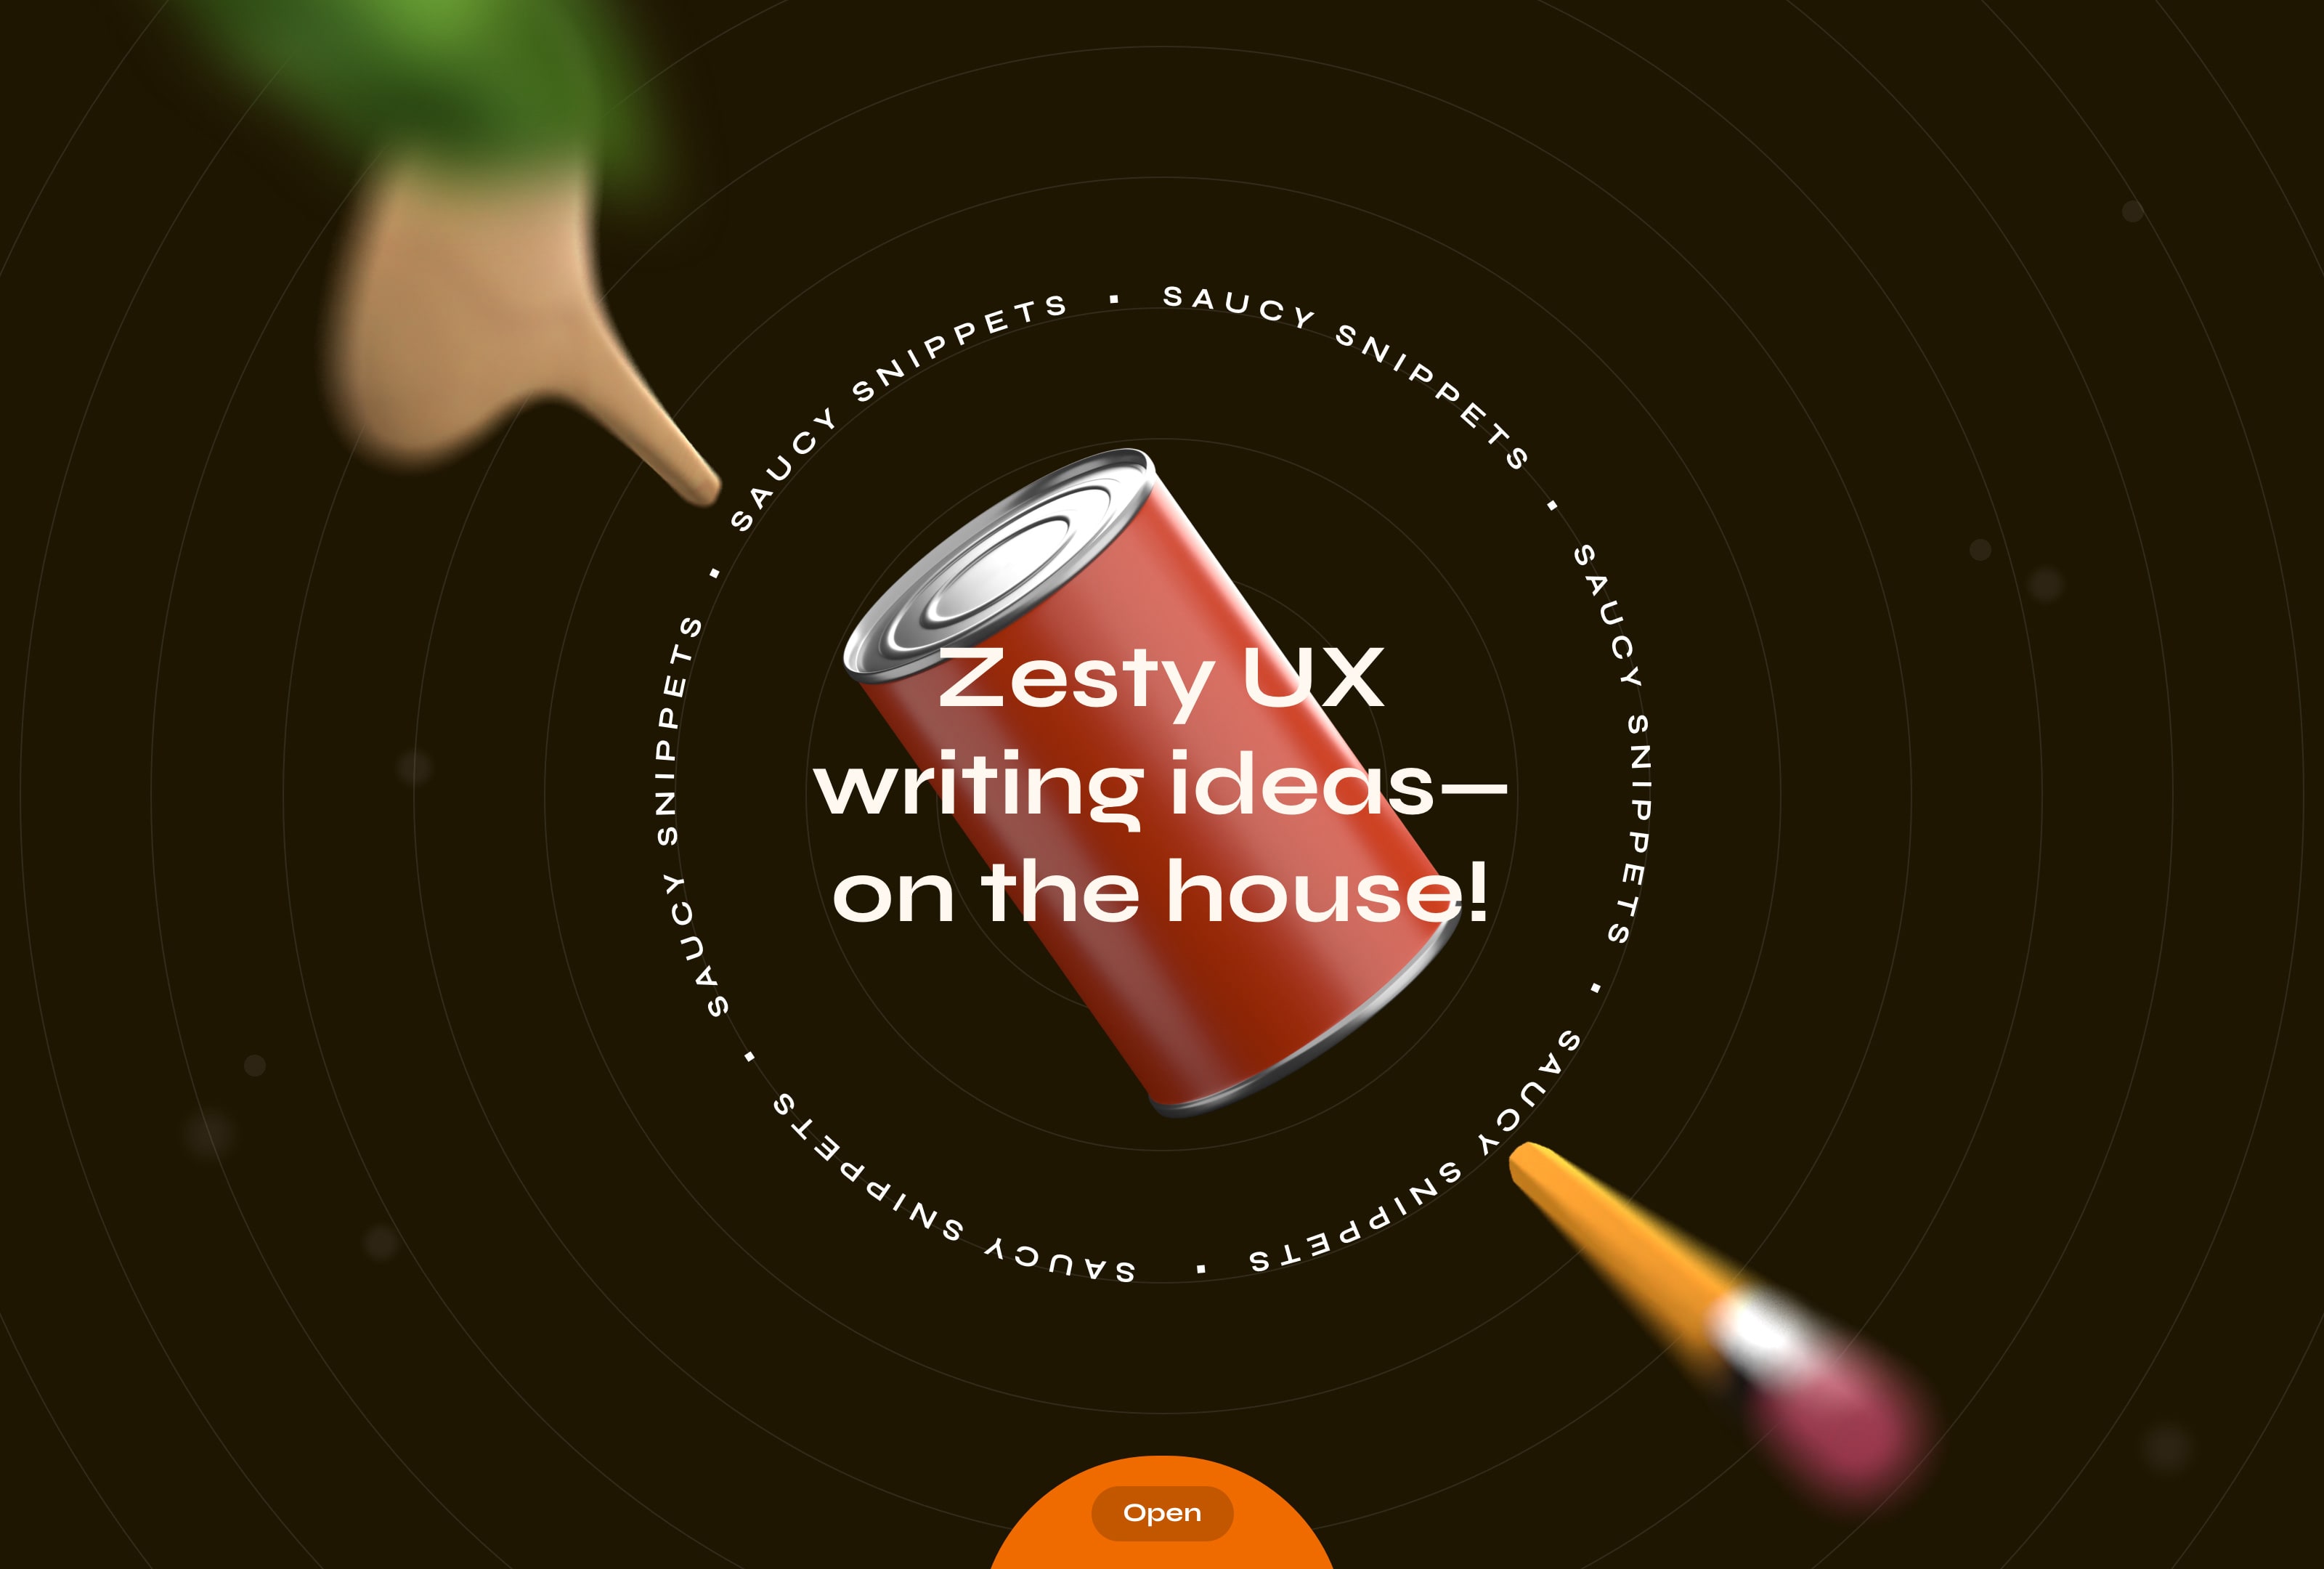 A can of sauce, spatula, pencil, and basil leaf float behind and in front of the text "Zesty UX writing ideas—on the house!"